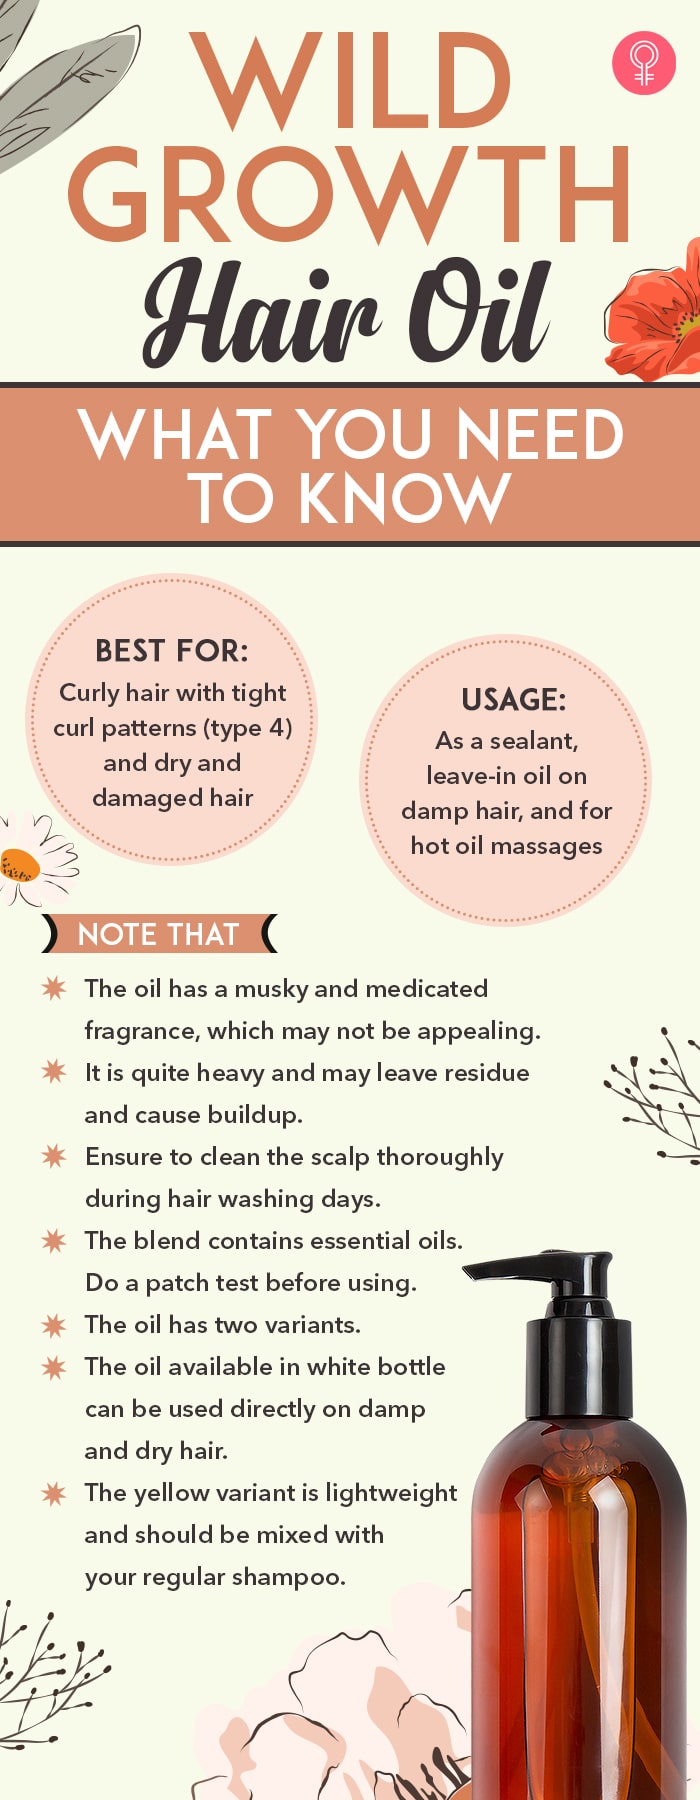 wild growth hair oil [infographic]